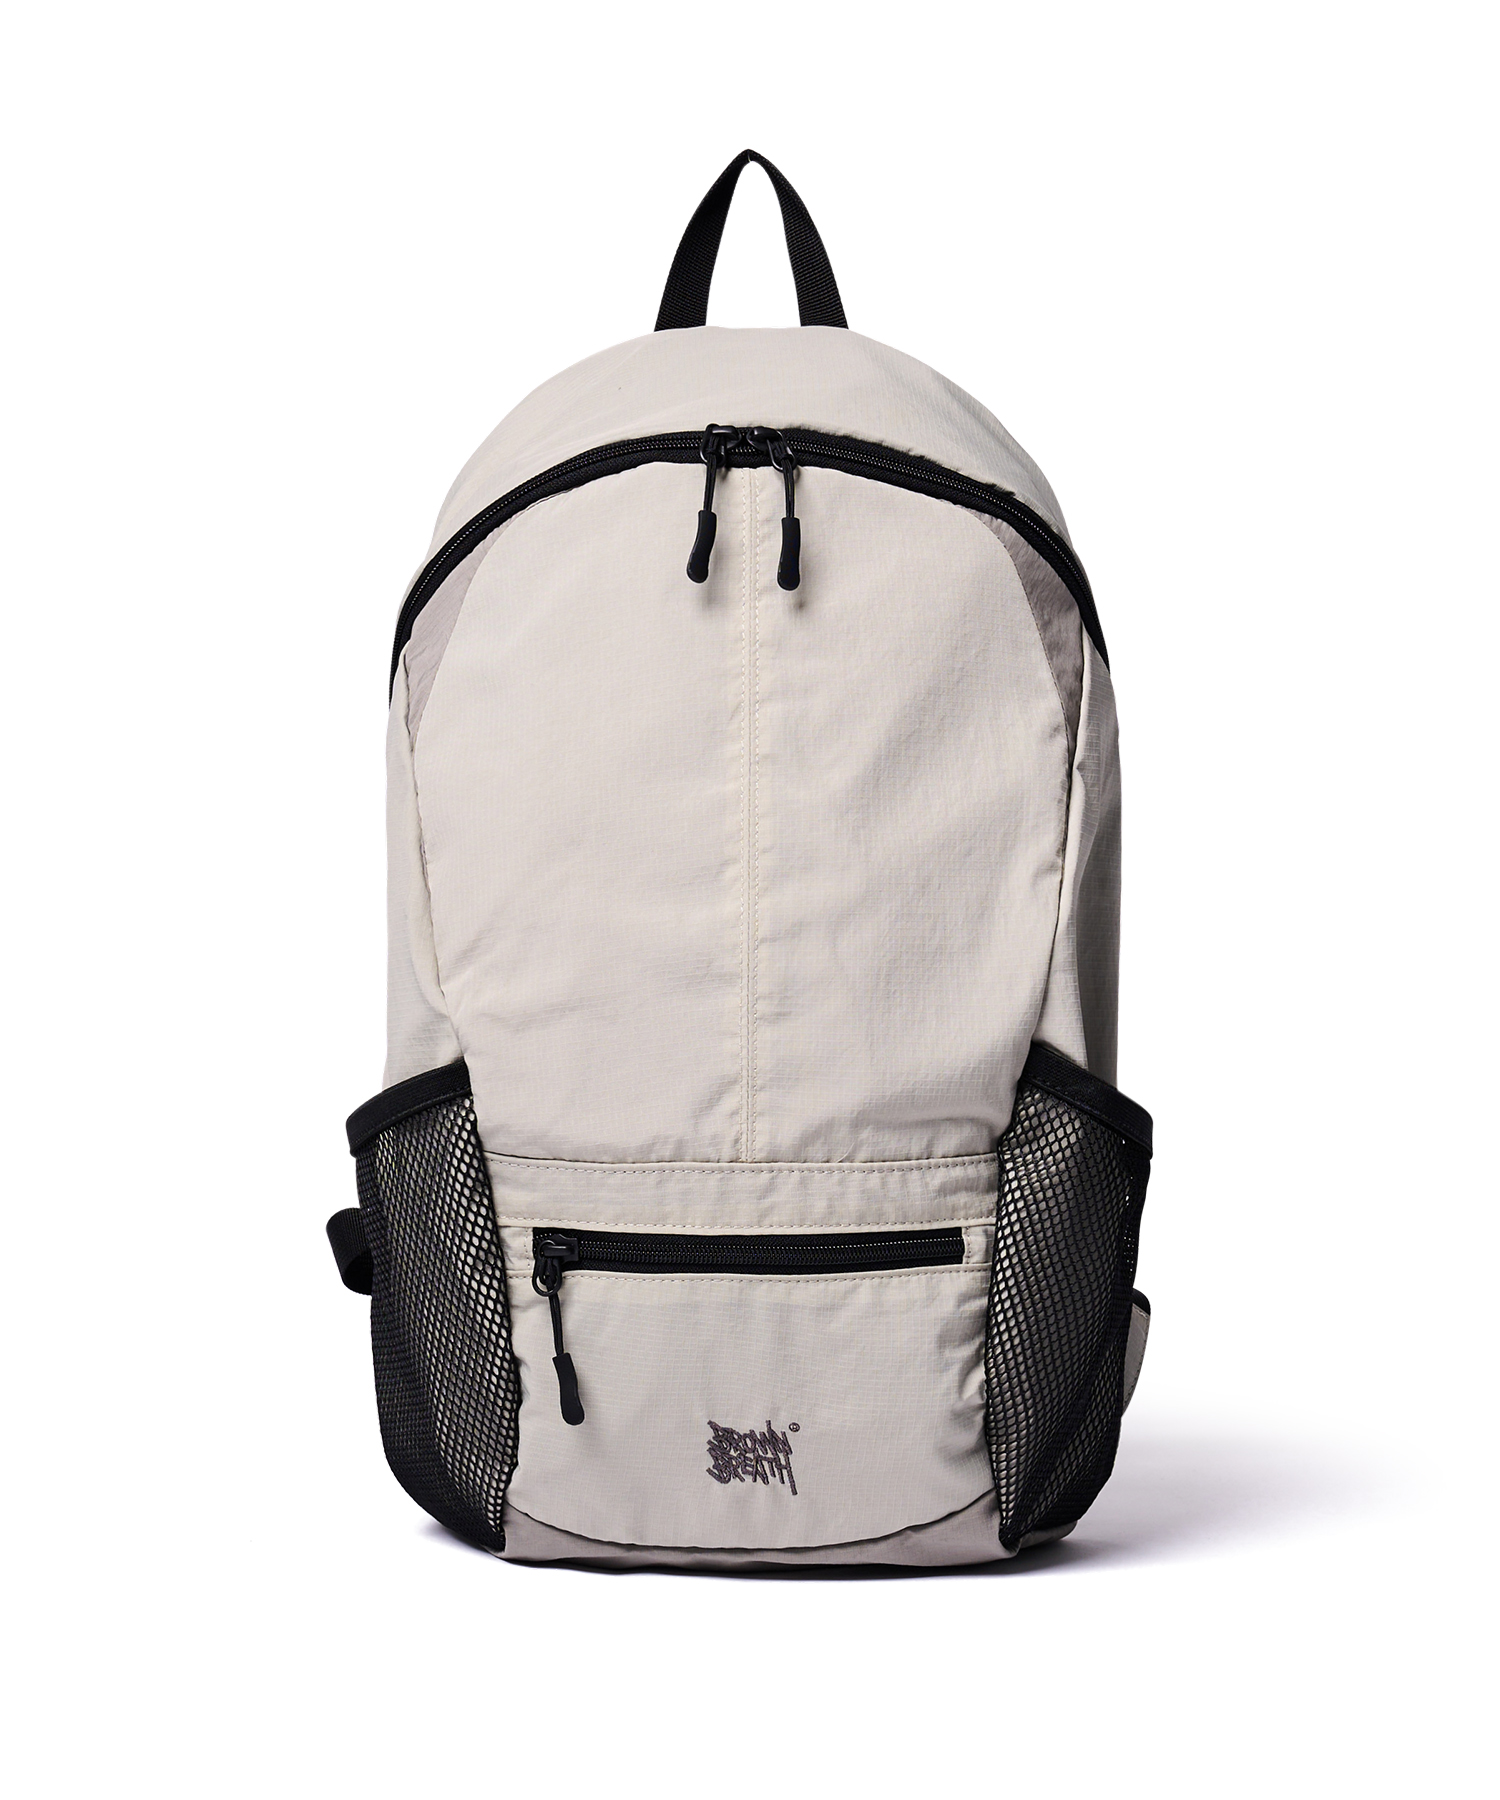 ACTS PACKABLE BACKPACK - GREY